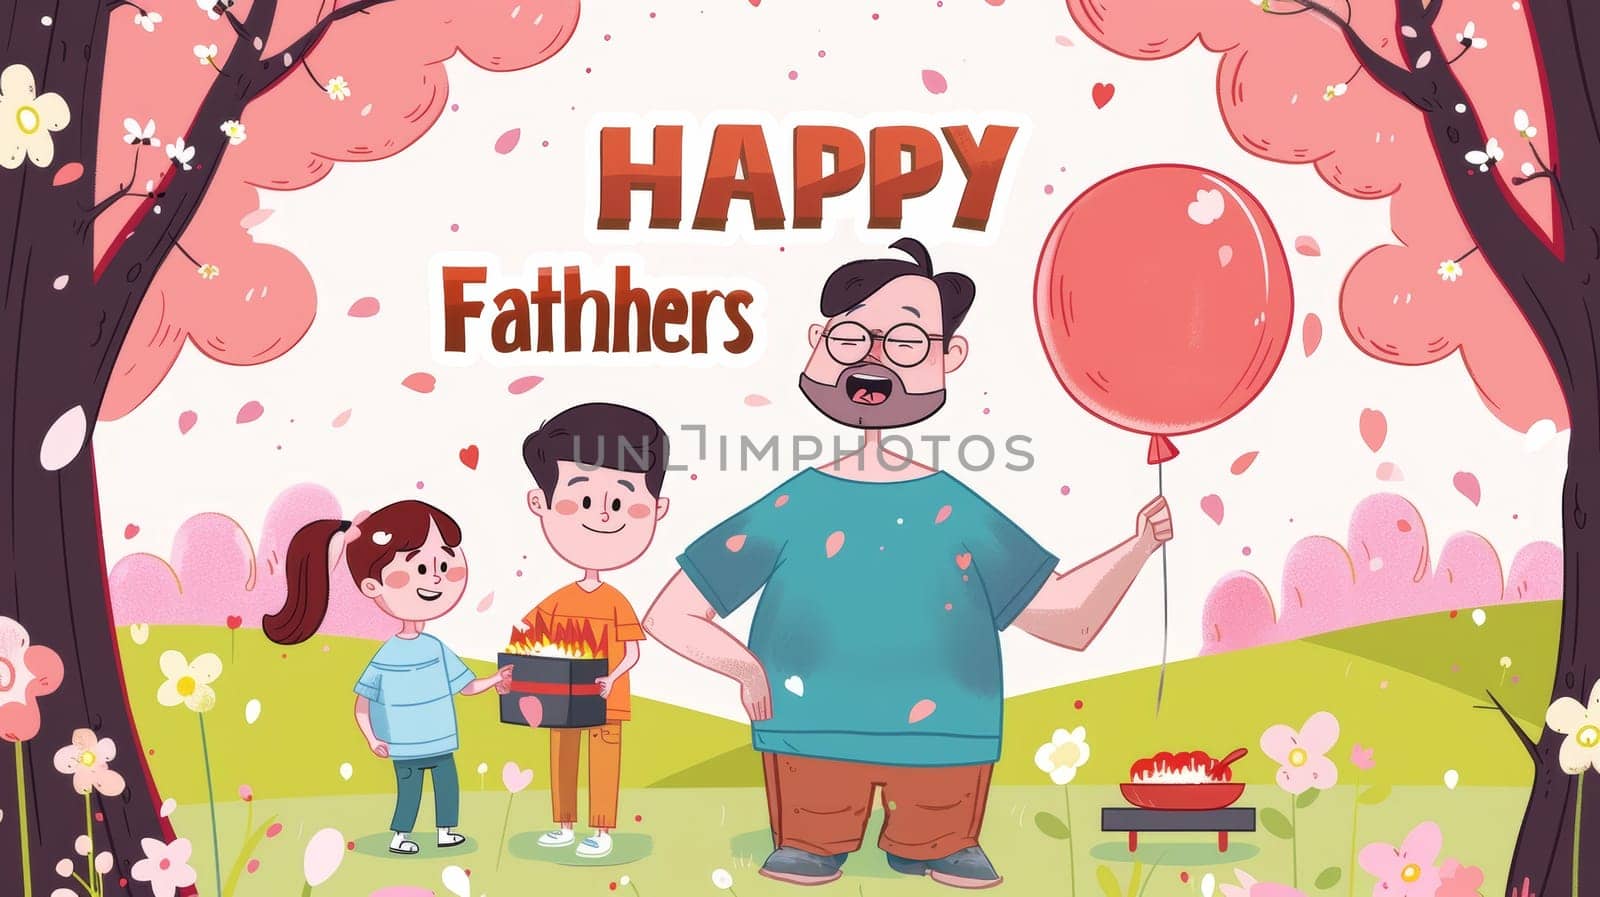 An animated image of a joyful father with two kids, holding a balloon and a cake, celebrating Fathers Day outdoors with pink blossoms around. by sfinks